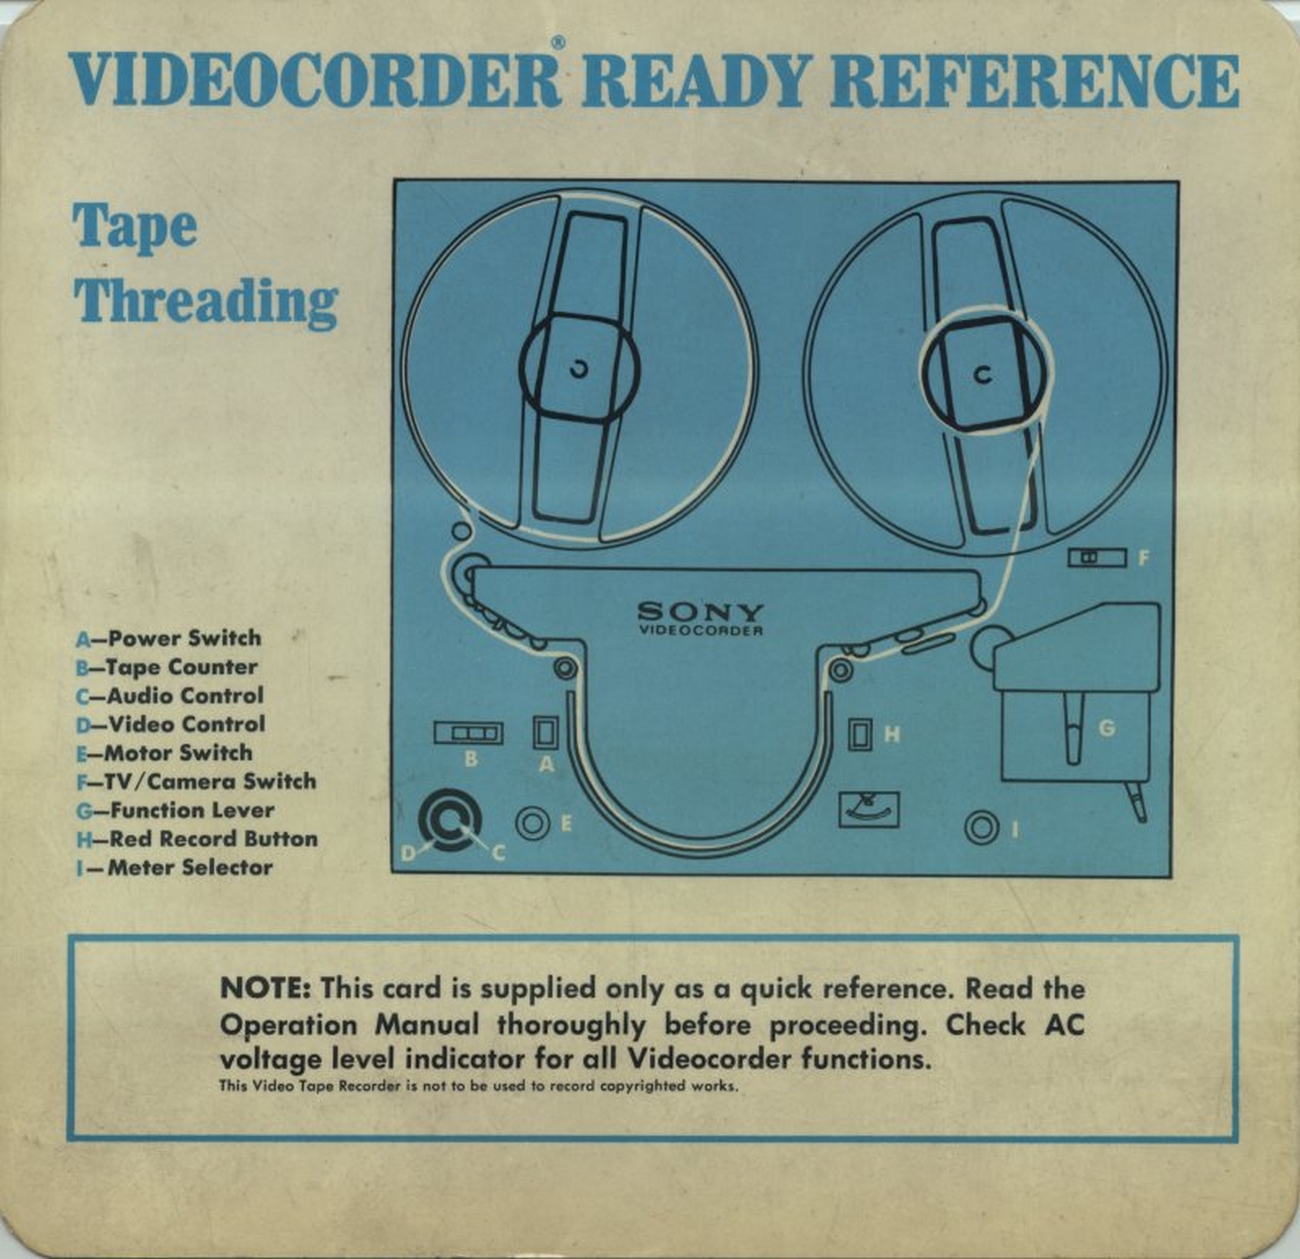 How to thread the 1/2" tape